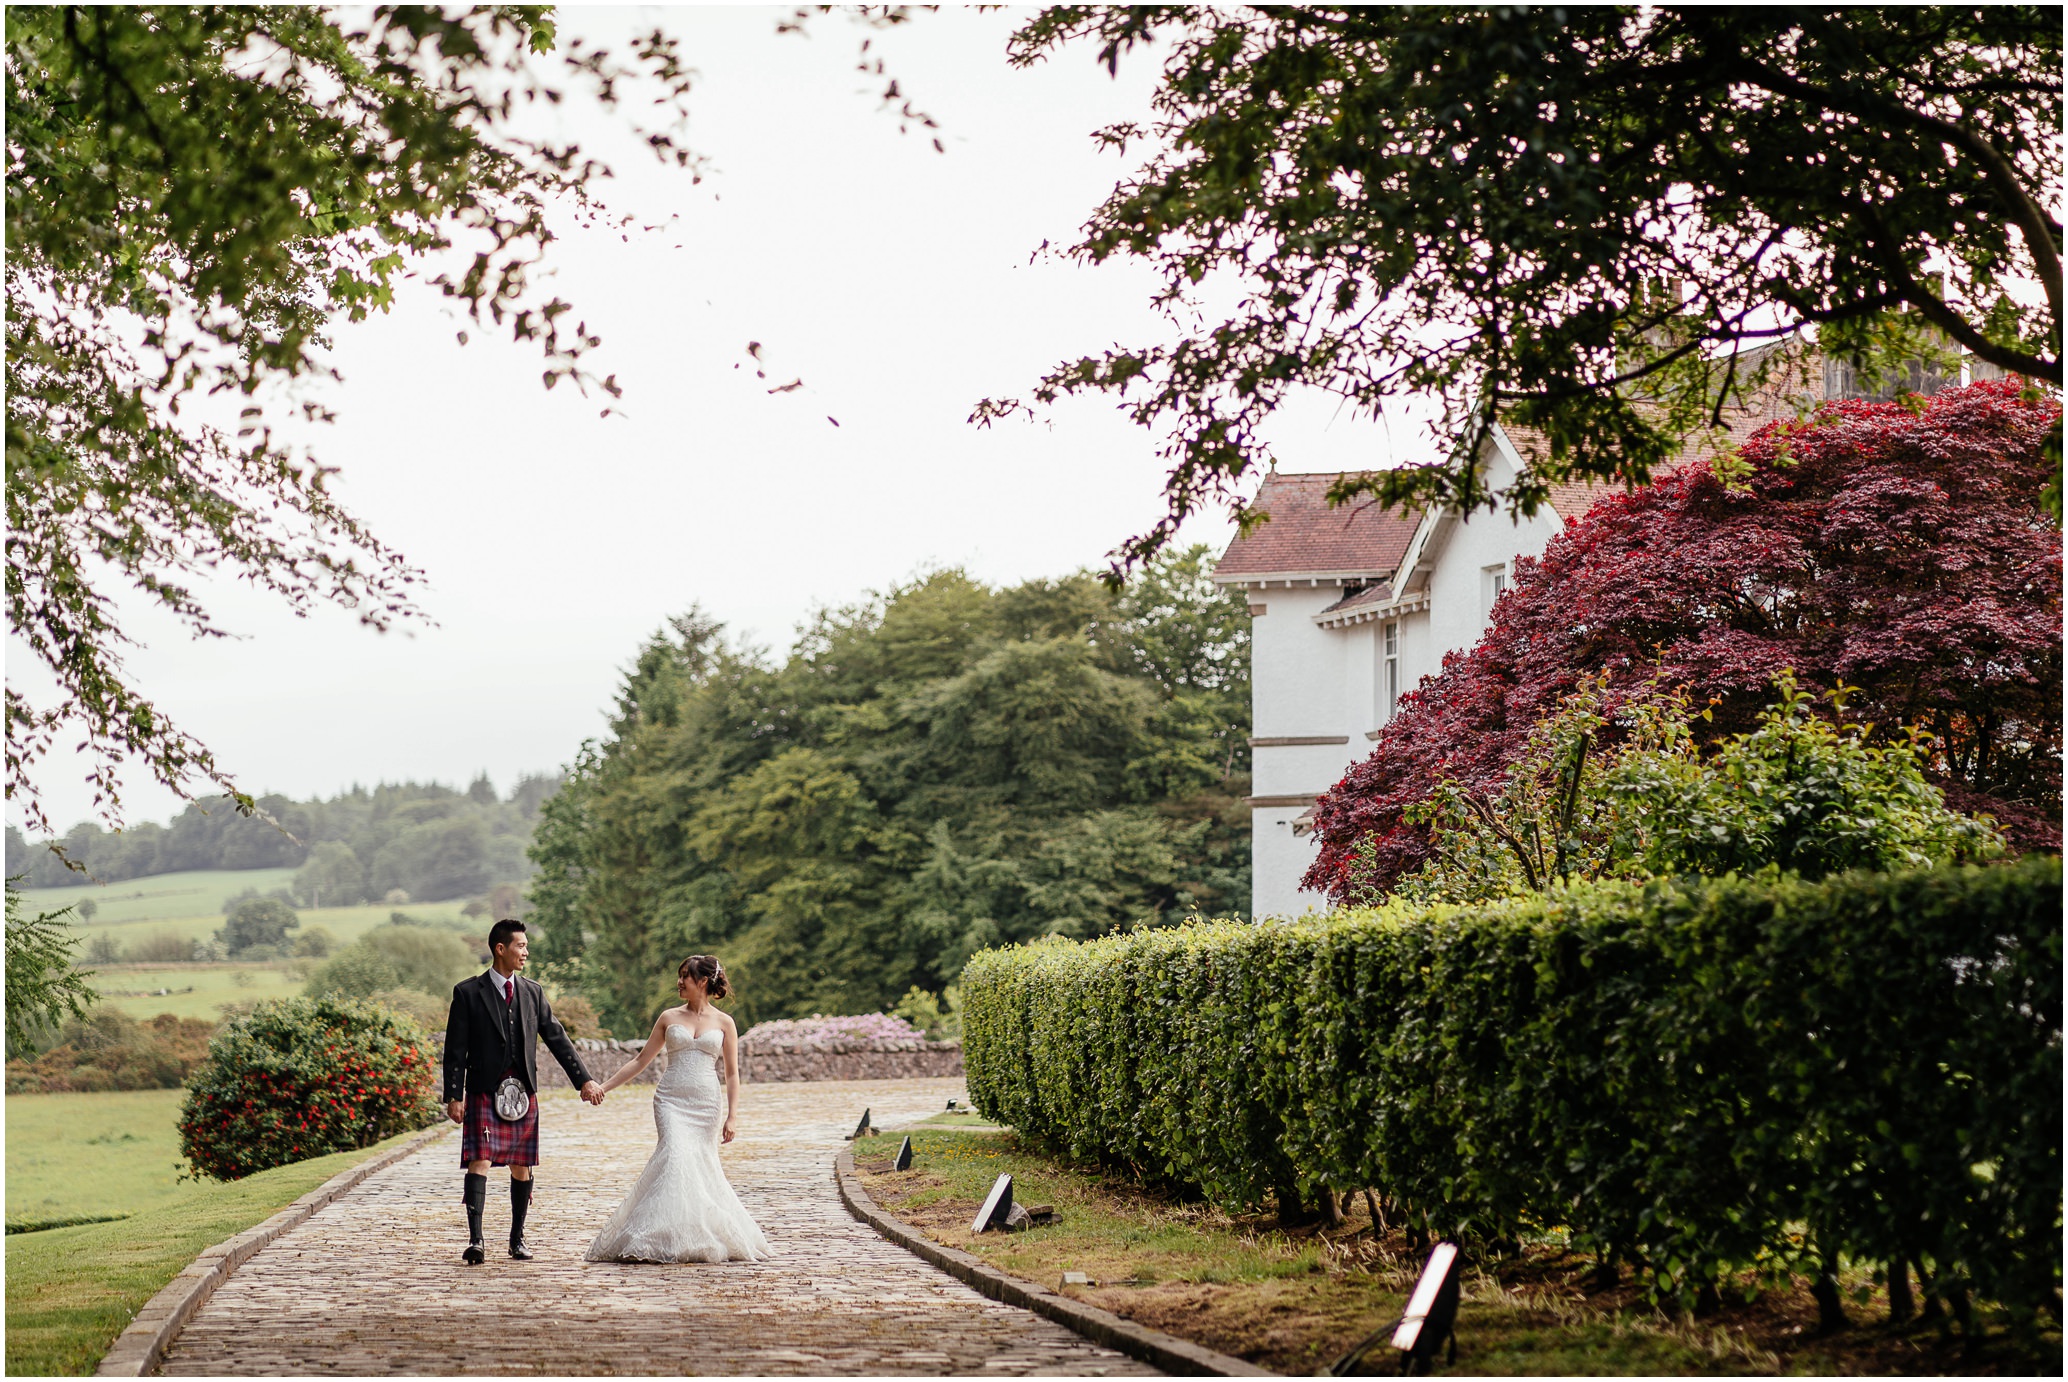 bride wearing white dress and groom in kilt outfit walking hand in hand down cobbled entrance to the estate green hedges trees in foreground and background and estate house post wedding photoshoot glasgow fotomaki photography